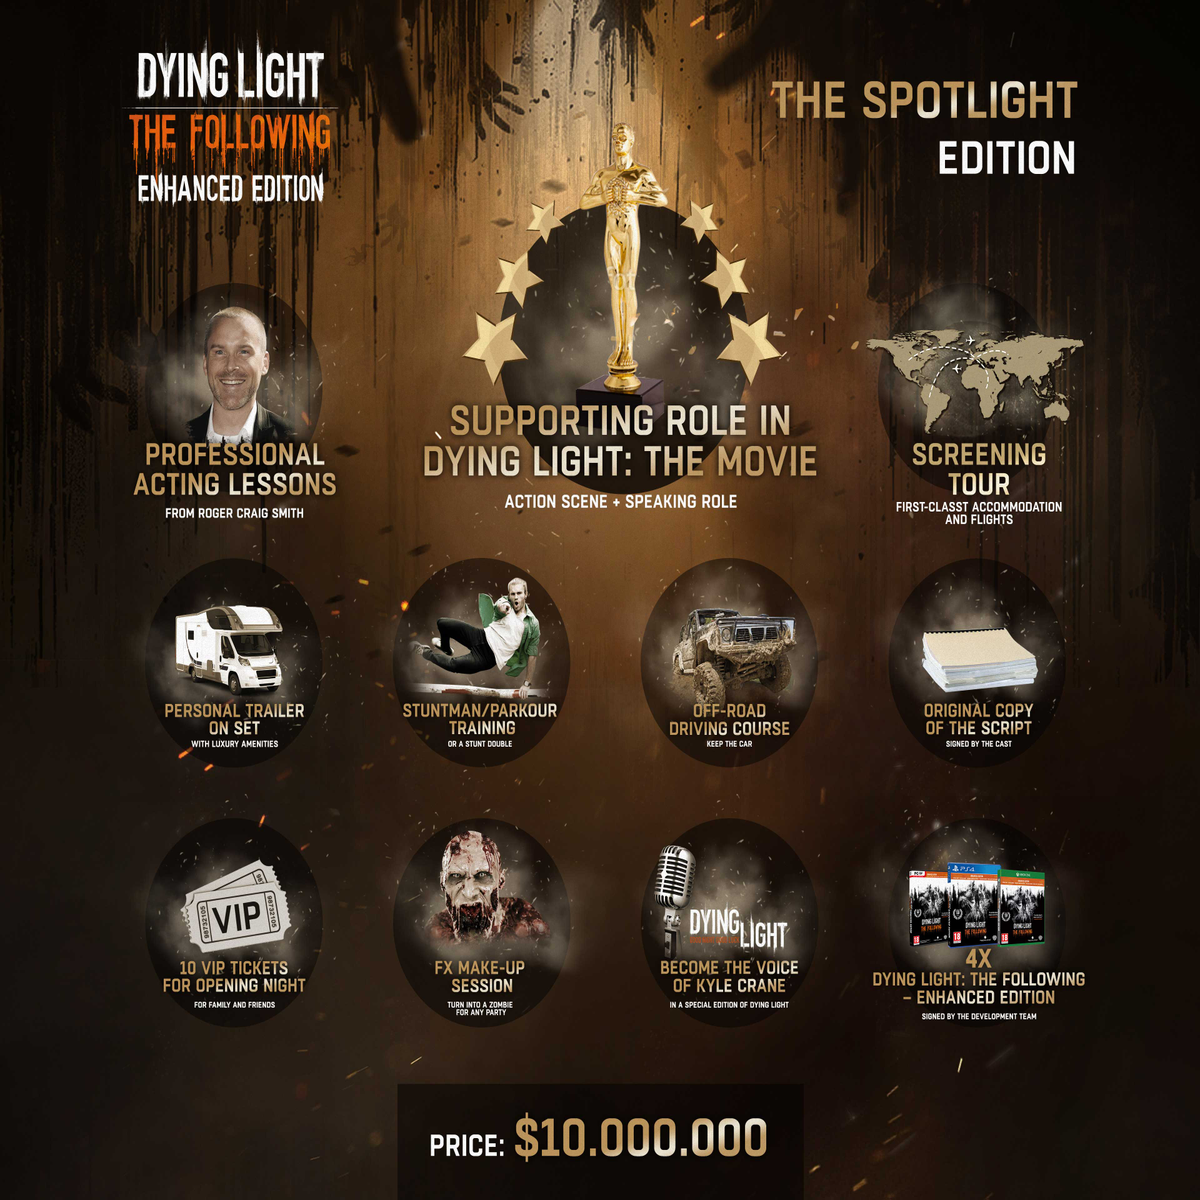 Dying Light Enhanced Edition - DreamGame - Official Retailer of